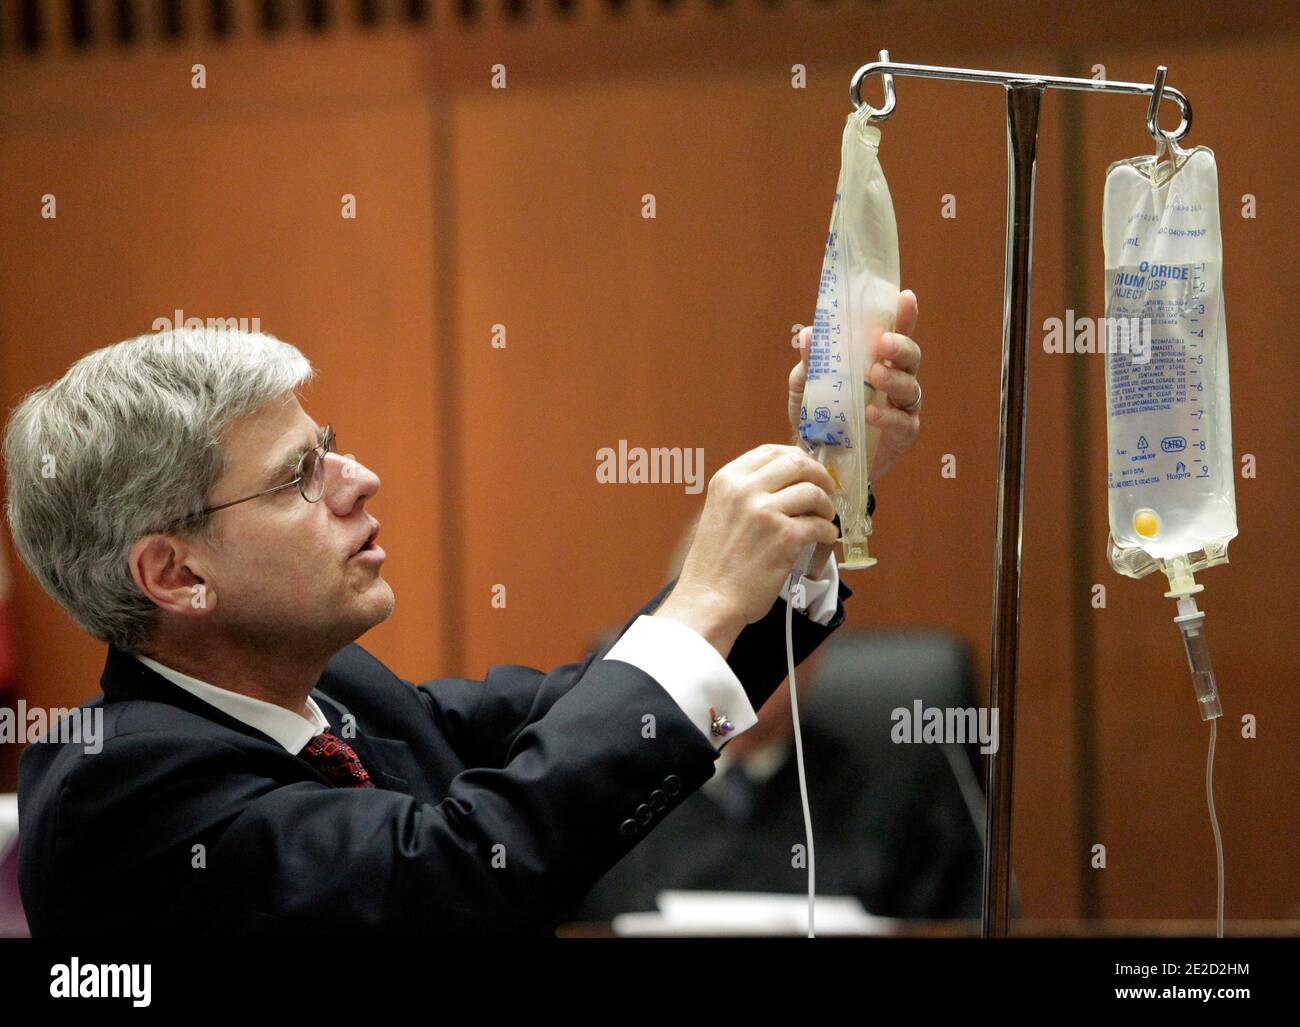 Anesthesiology expert Dr. Steven Shafer, left, places a bottle of propofol into an empty saline bag as he demonstrates the use of propofol during Dr. Conrad Murray's involuntary manslaughter trial in Los Angeles on October 20, 2011. Murray has pleaded not guilty and faces four years in prison and the loss of his medical license if convicted of involuntary manslaughter in Michael Jackson's death. Photo by Reed Saxon/Pool/ABACAPRESS.COM Stock Photo